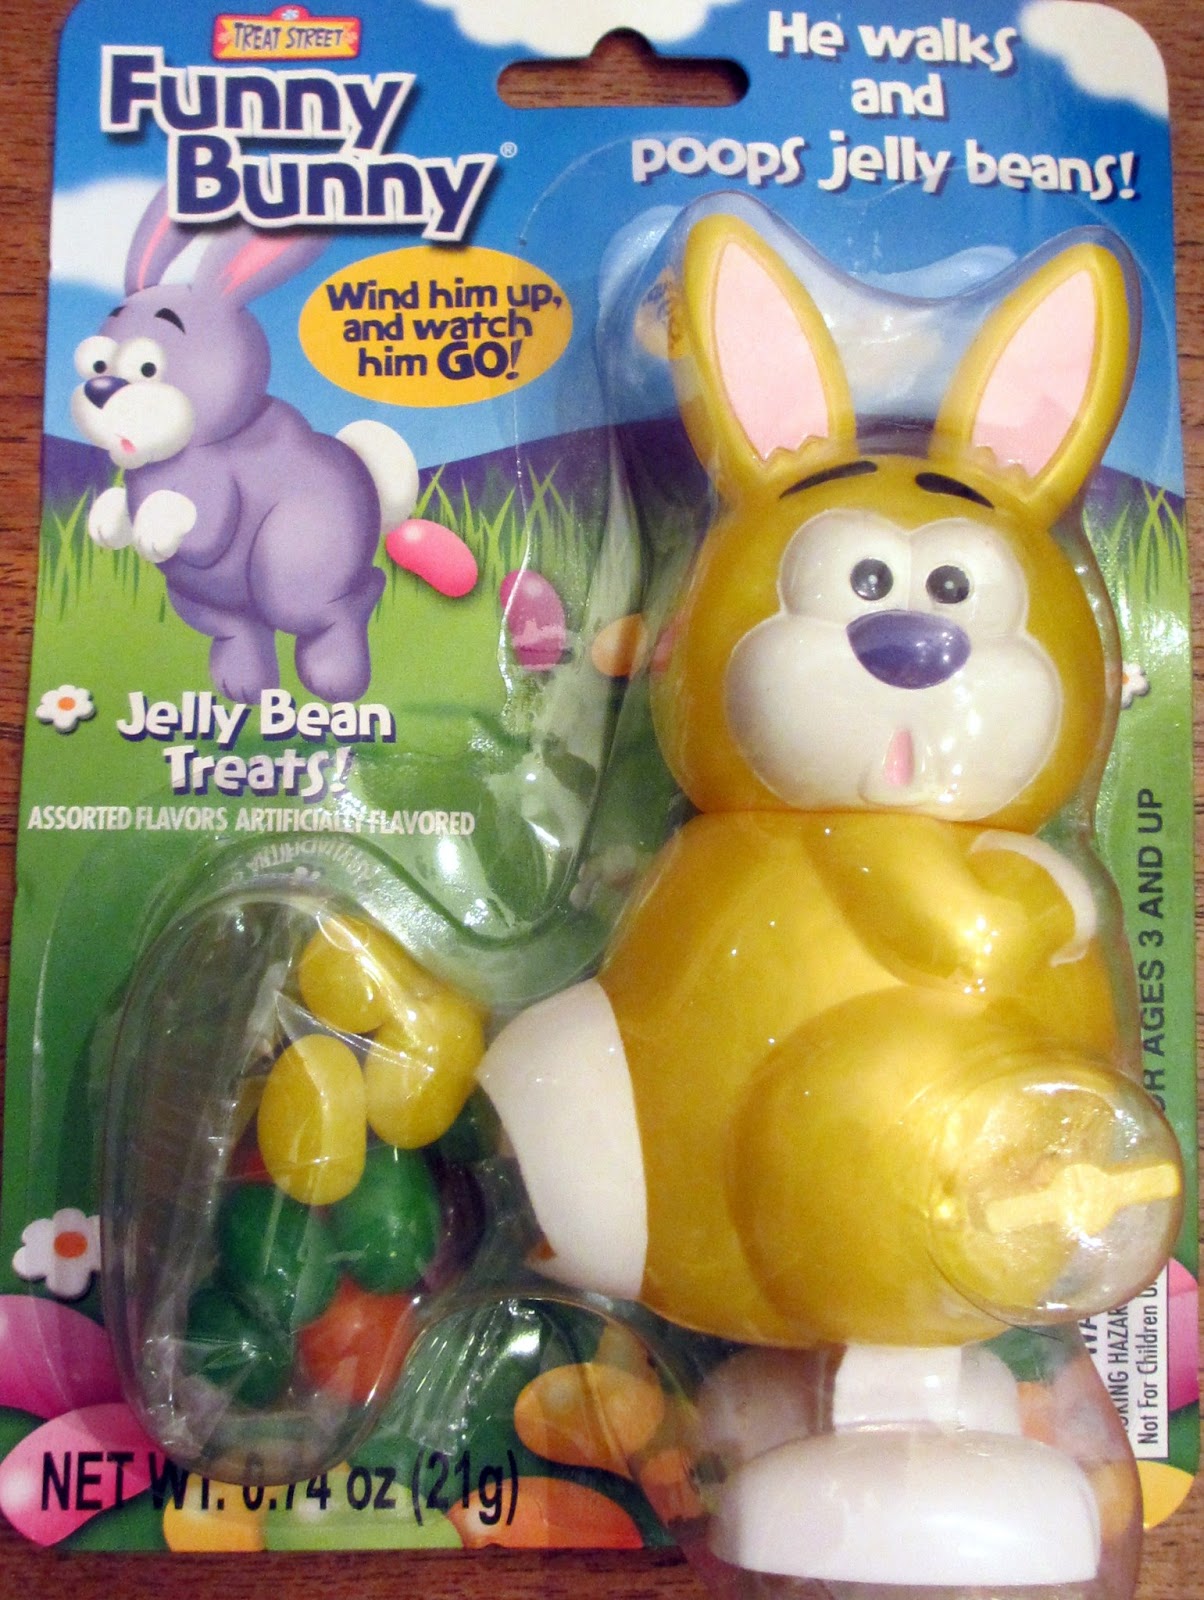 Easter bunny that poops jelly beans. Guess that's better than pooping ...